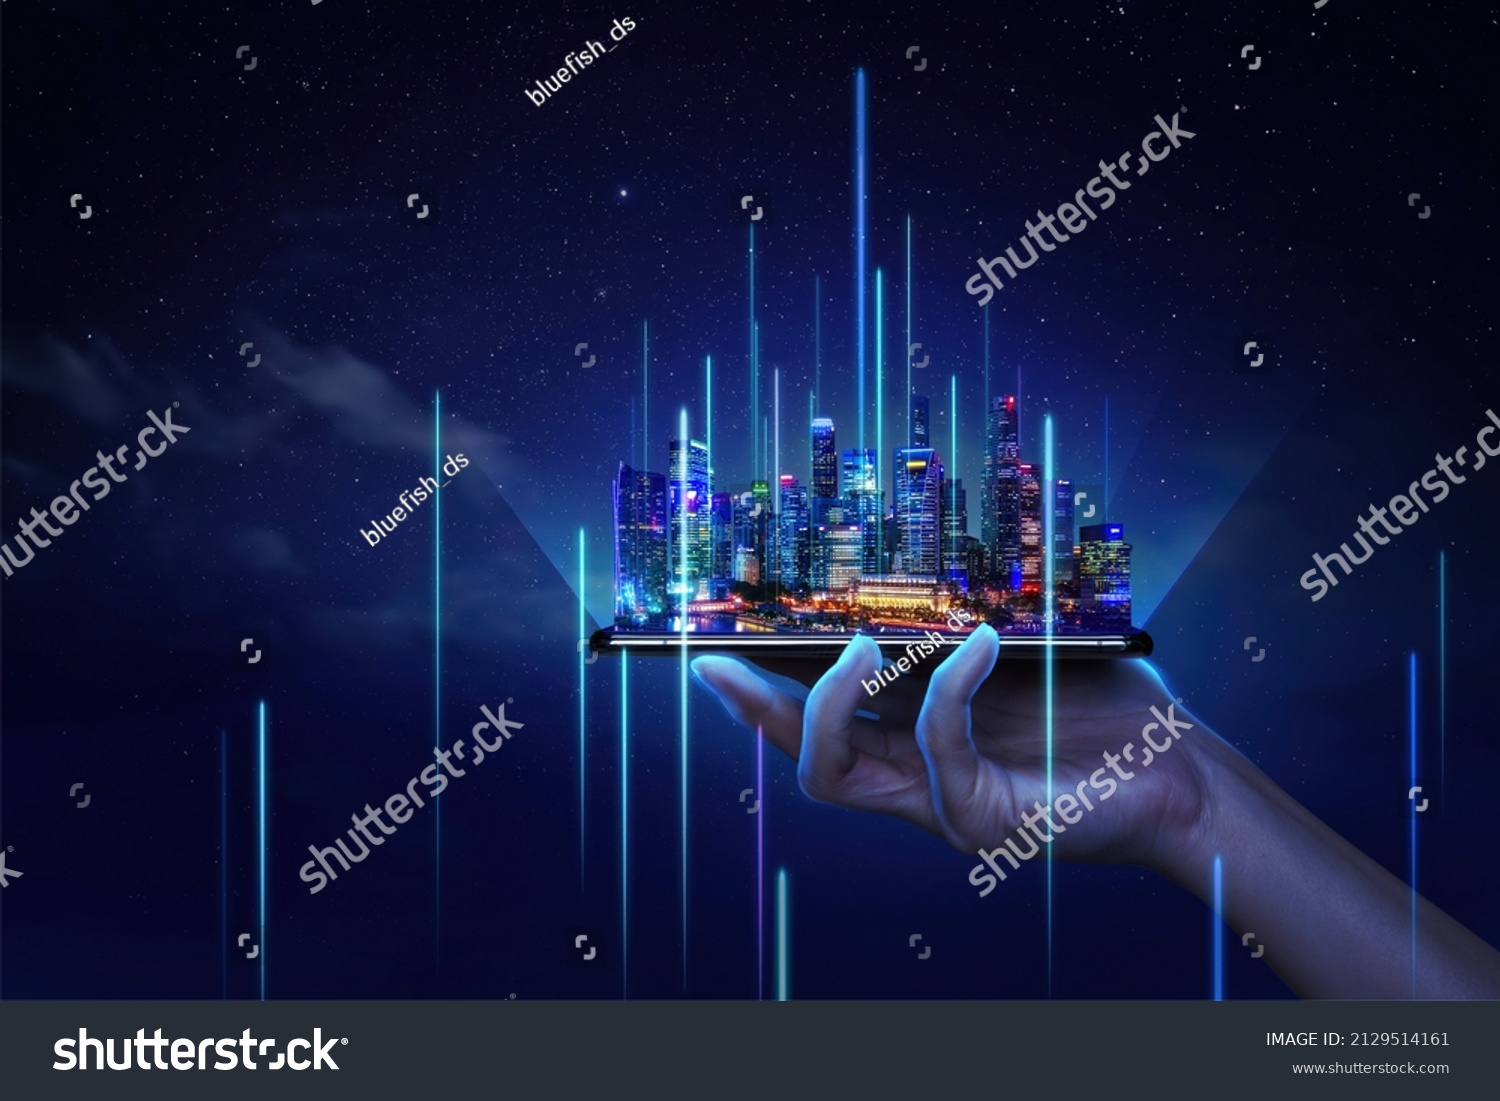 Modern cityscape and communication network concept. (Internet of Things). ICT (Information communication Technology). 5G. Smart city. Digital transformation. Singapore #2129514161